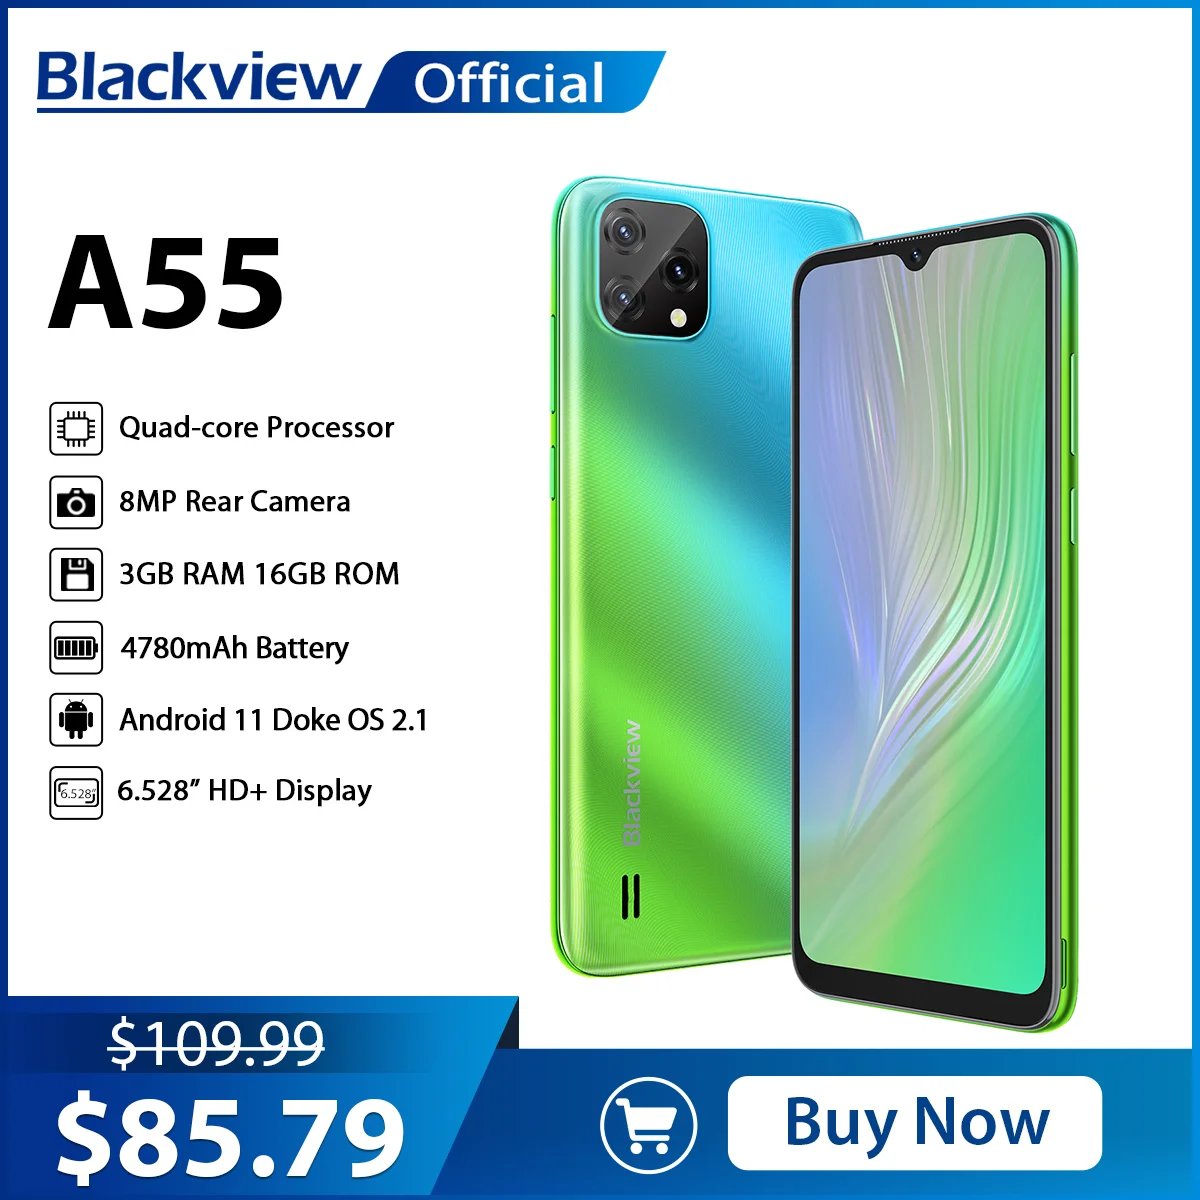 Blackview New A55 Smartphone 3GB 16GB 6.528